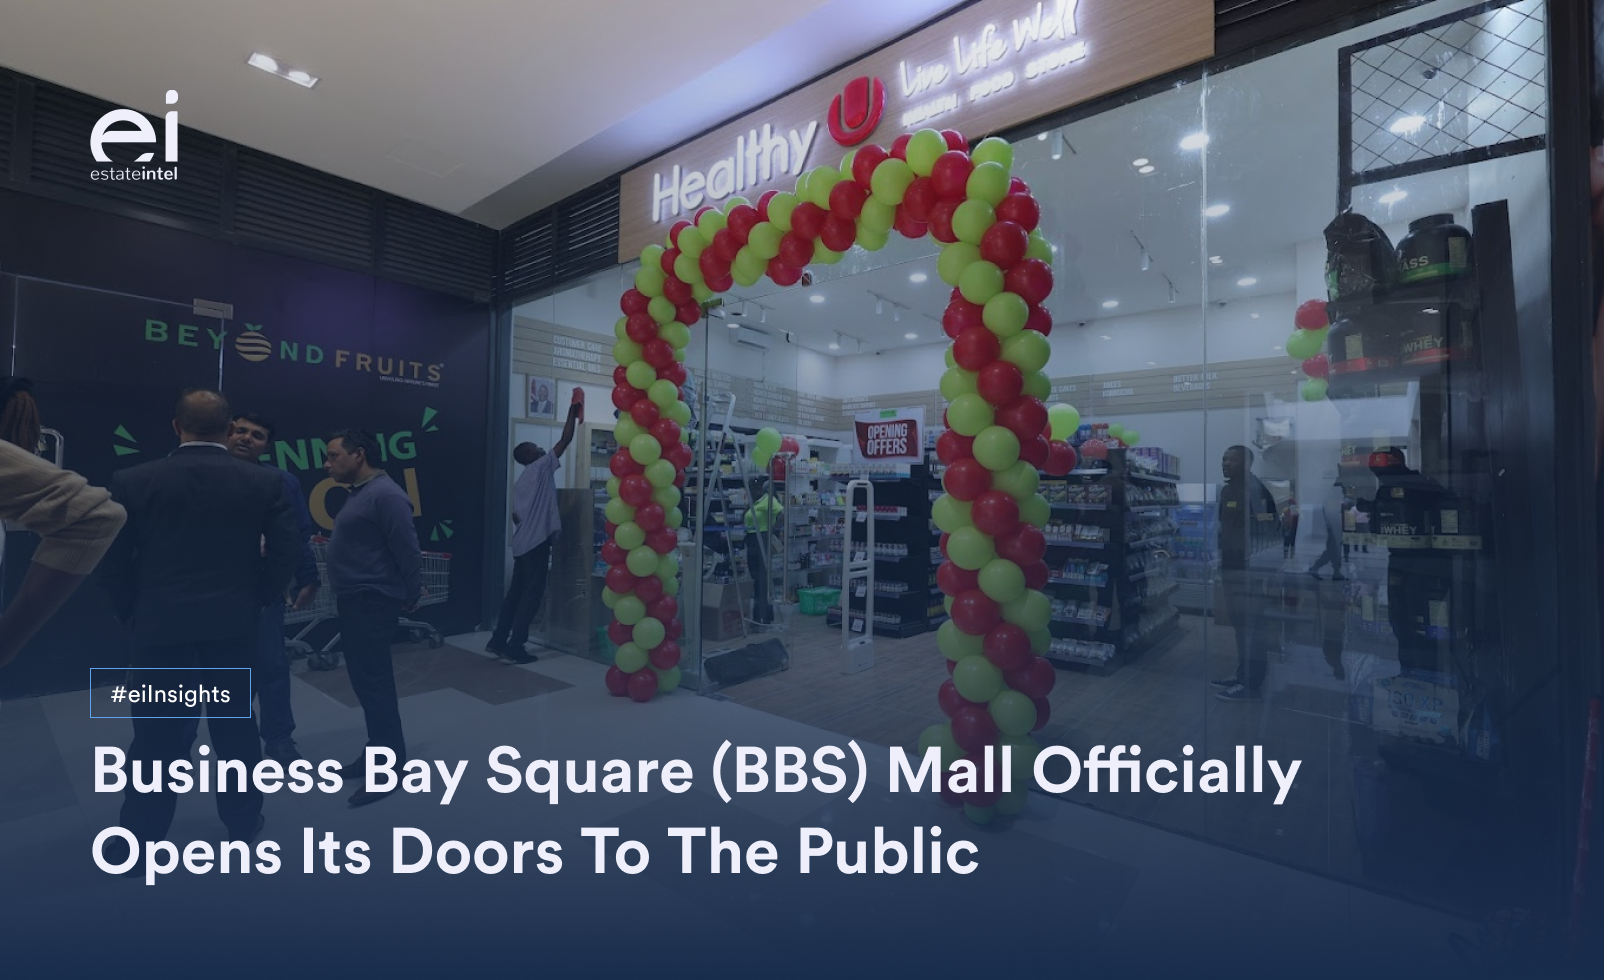 Business Bay Square (BBS) Mall Officially Opens Its Doors To The Public, And Expands Kenya’s Formal Retail Penetration